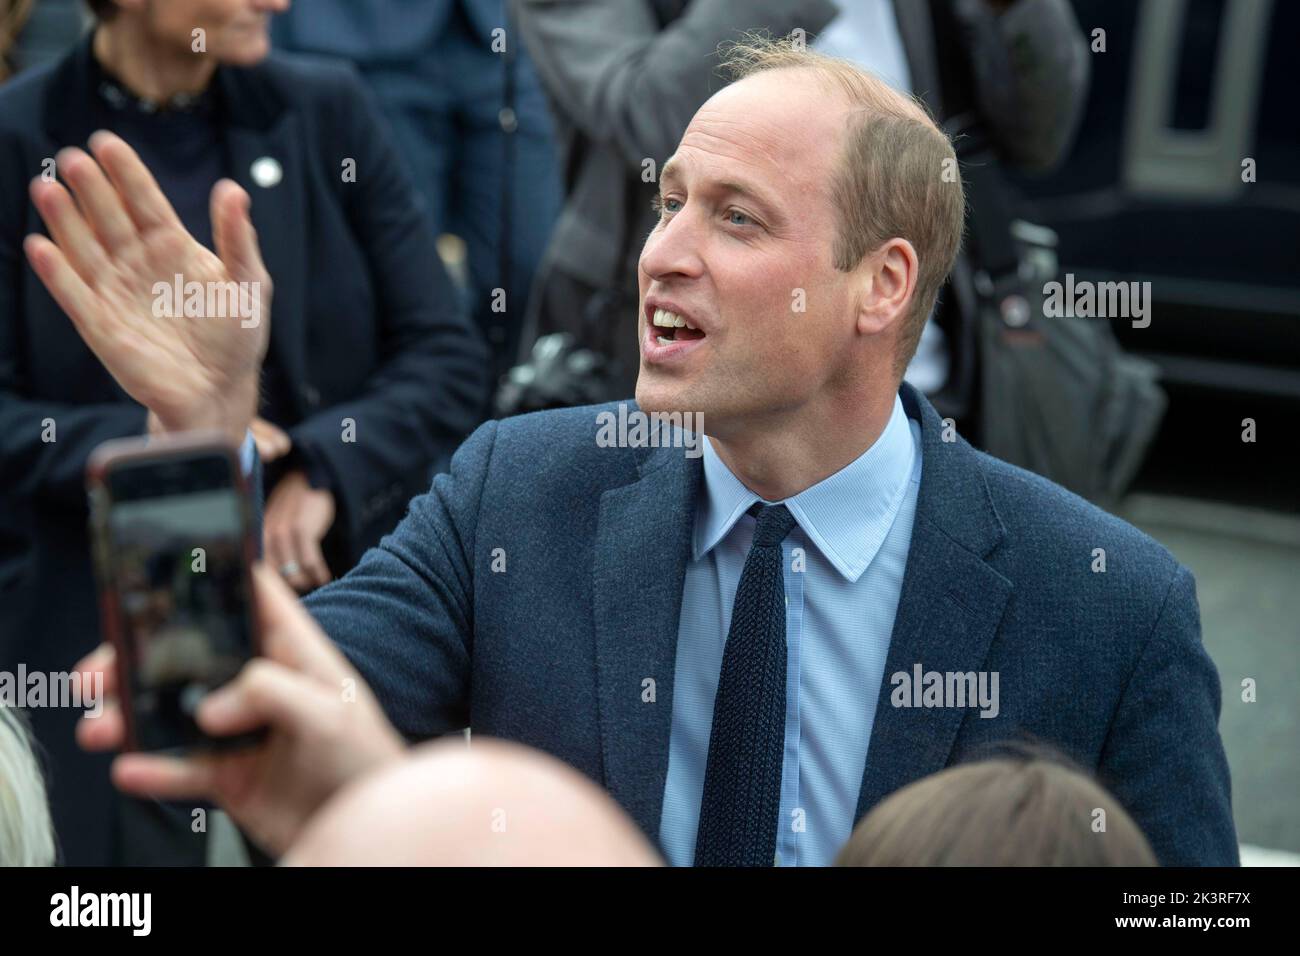 Prince William and Catherine Princess of Wales during their visit to Swansea this afternoon. The royal pair visited St Thomas church in Swansea which supports people in the local area and across Swansea. Stock Photo